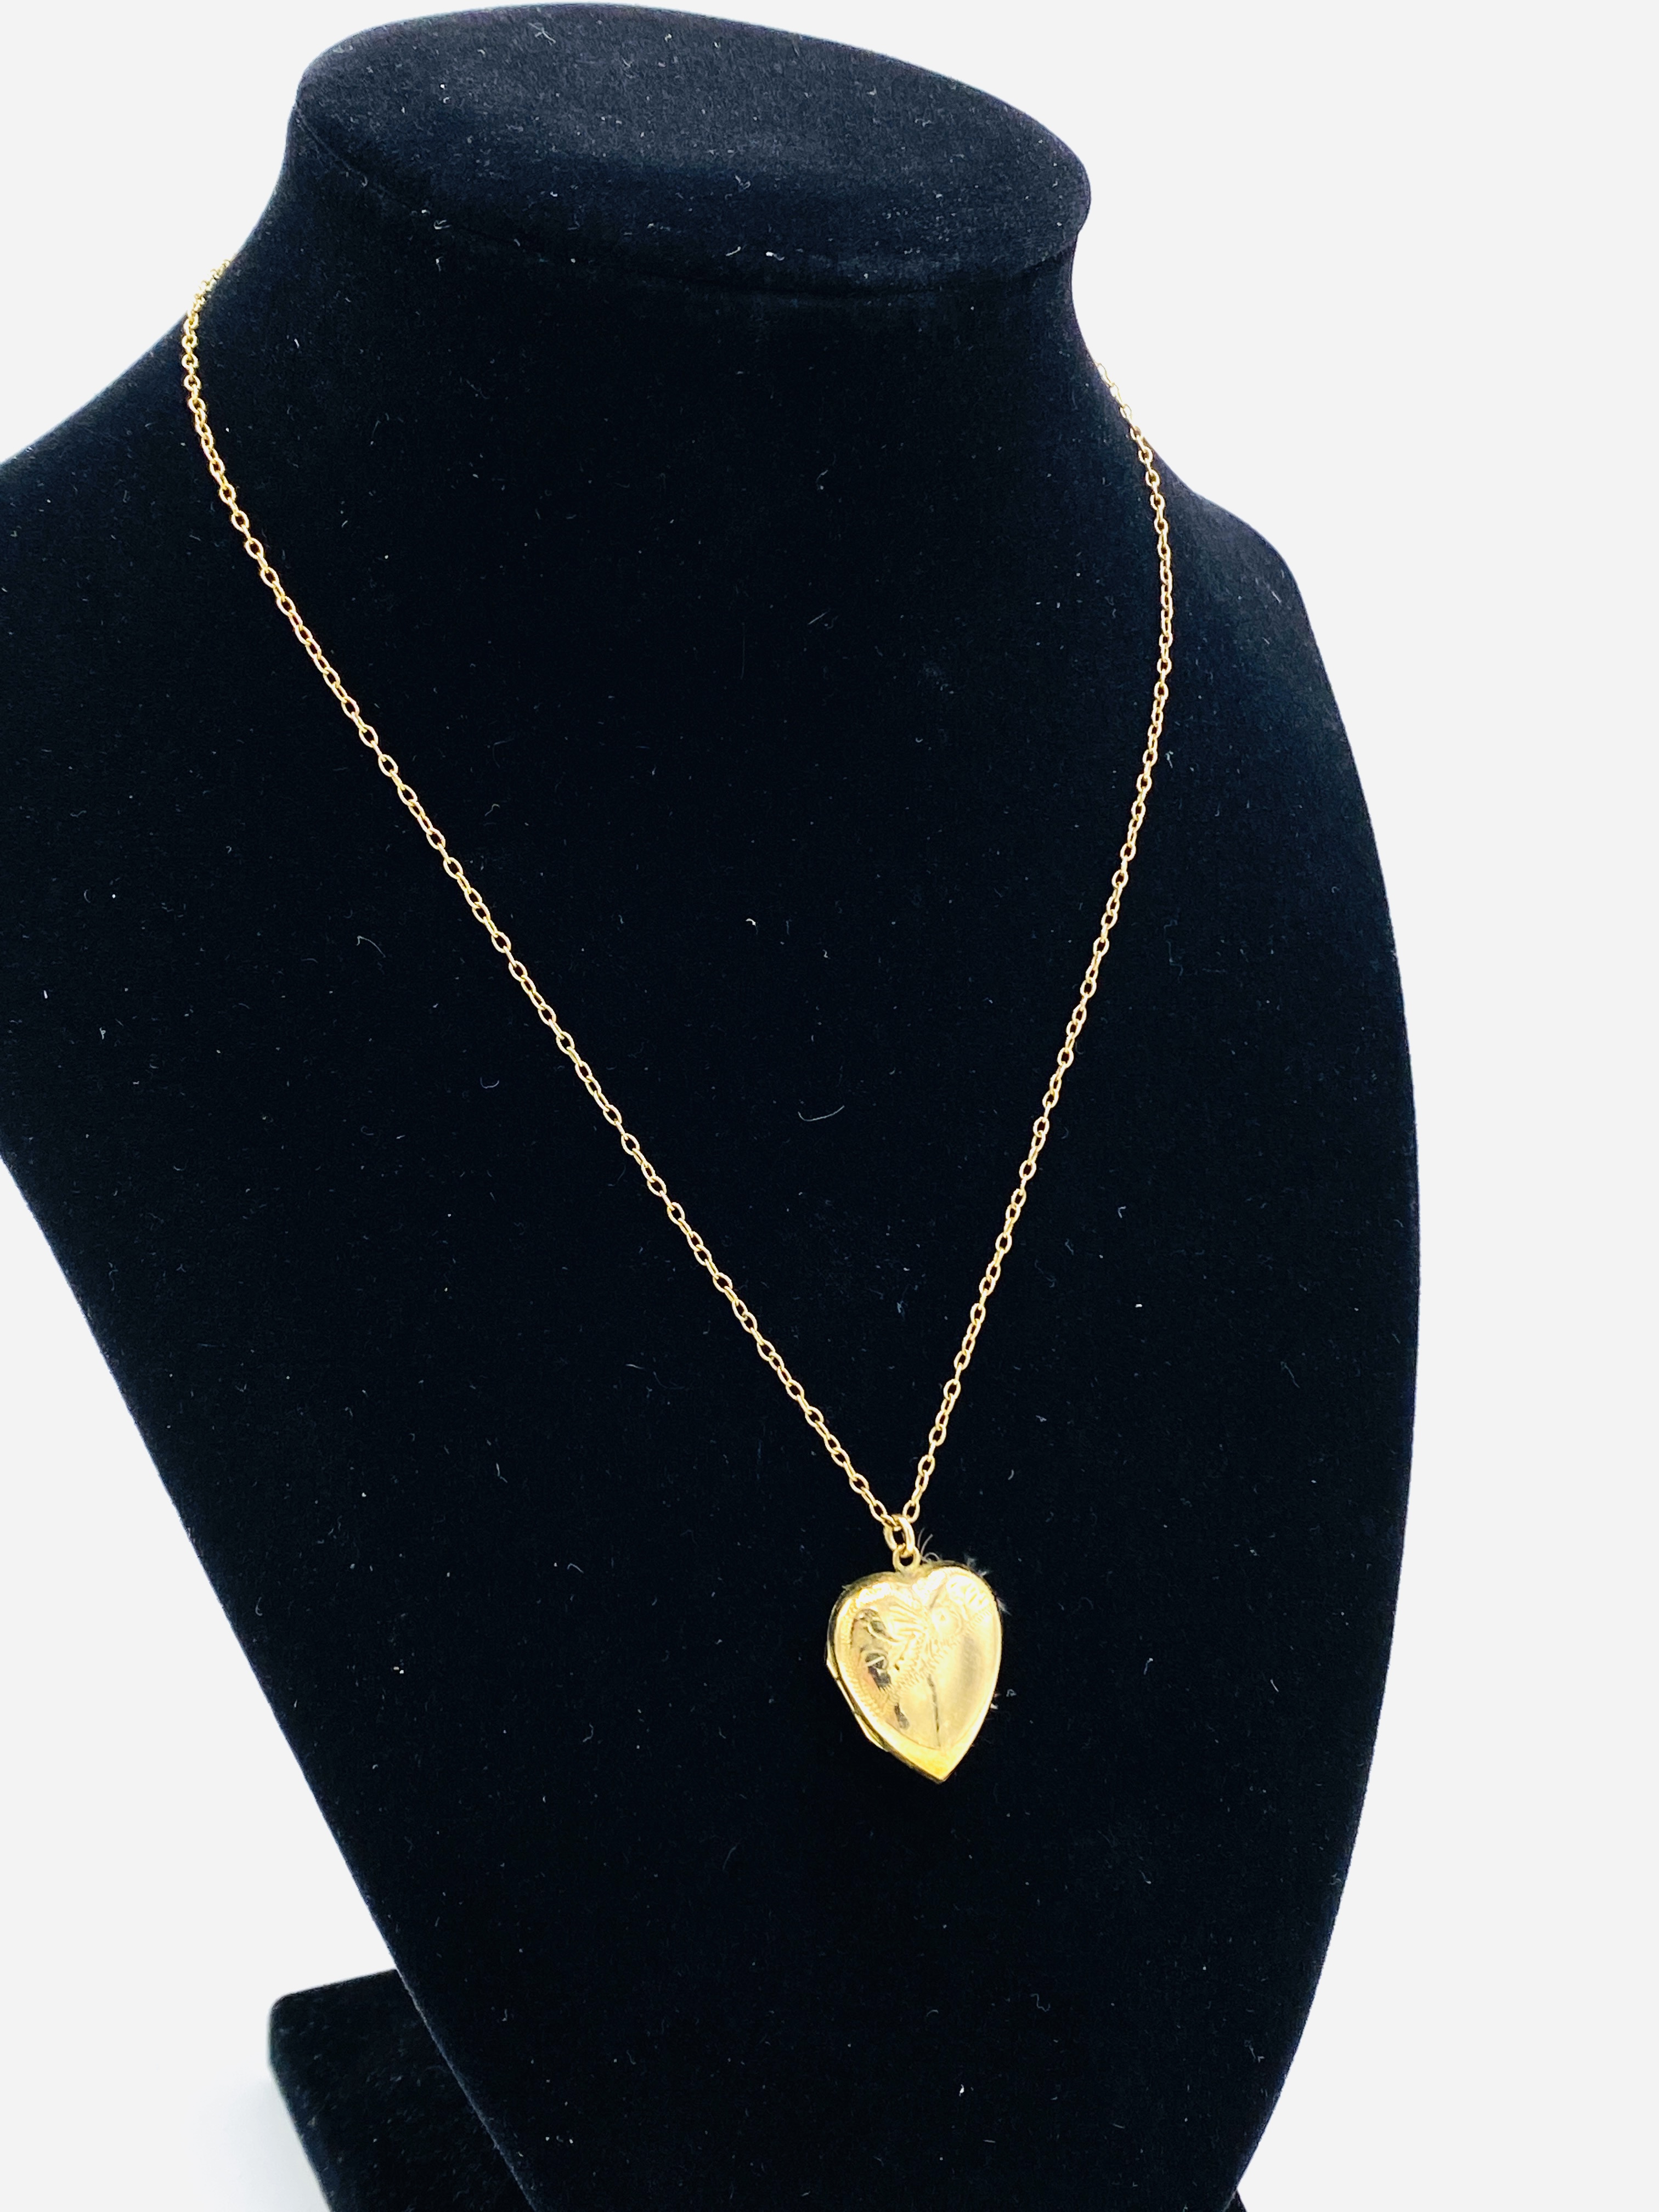 9ct gold heart shaped locket on a chain - Image 2 of 5